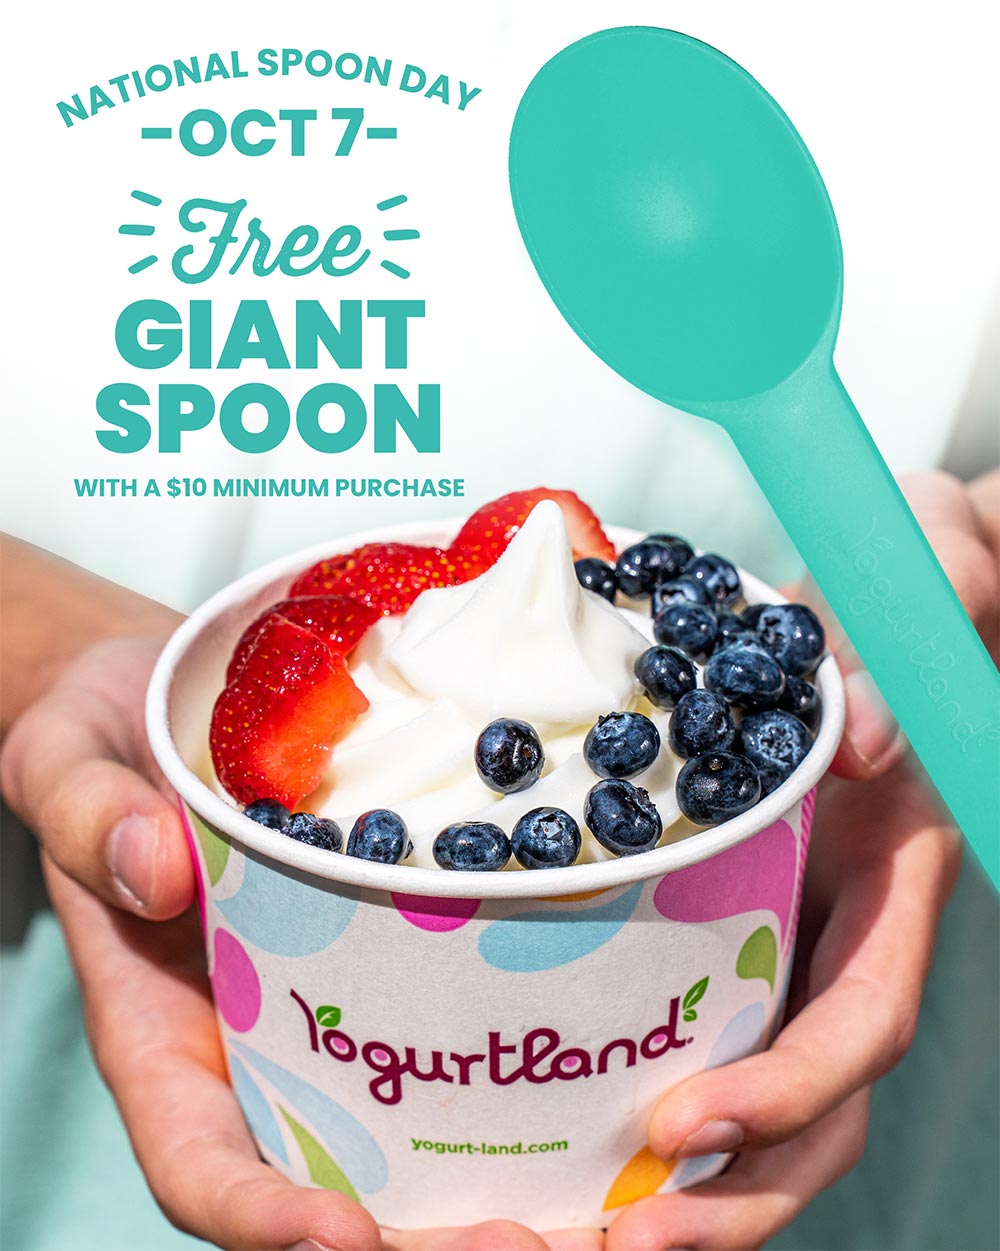 National Spoon Day: October 7 - Free Giant Spoon with a $10 minimum purchase!